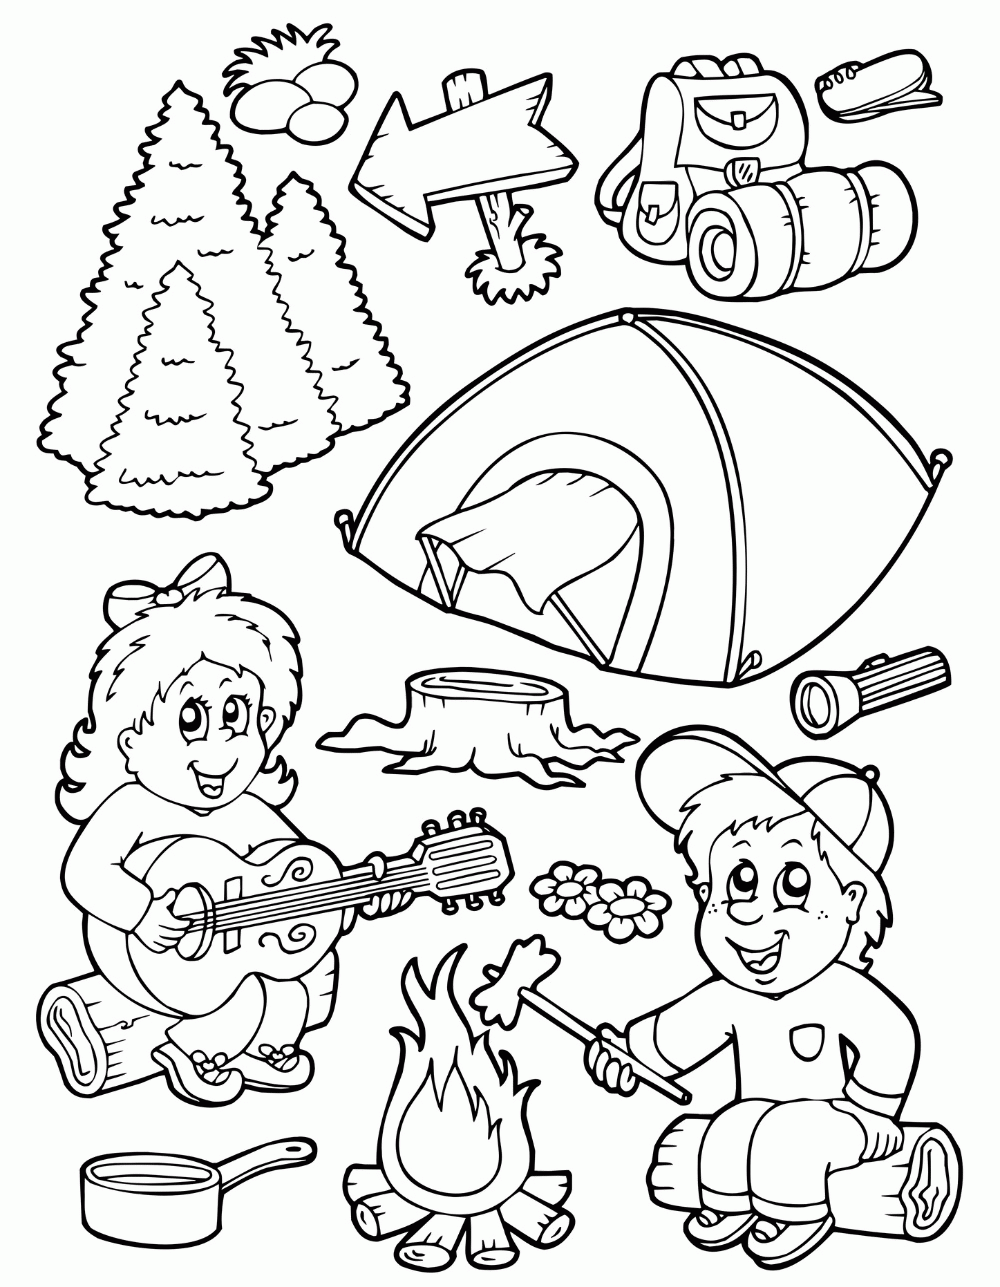  Camping Smore Coloring Pages - Smores Coloring Pages